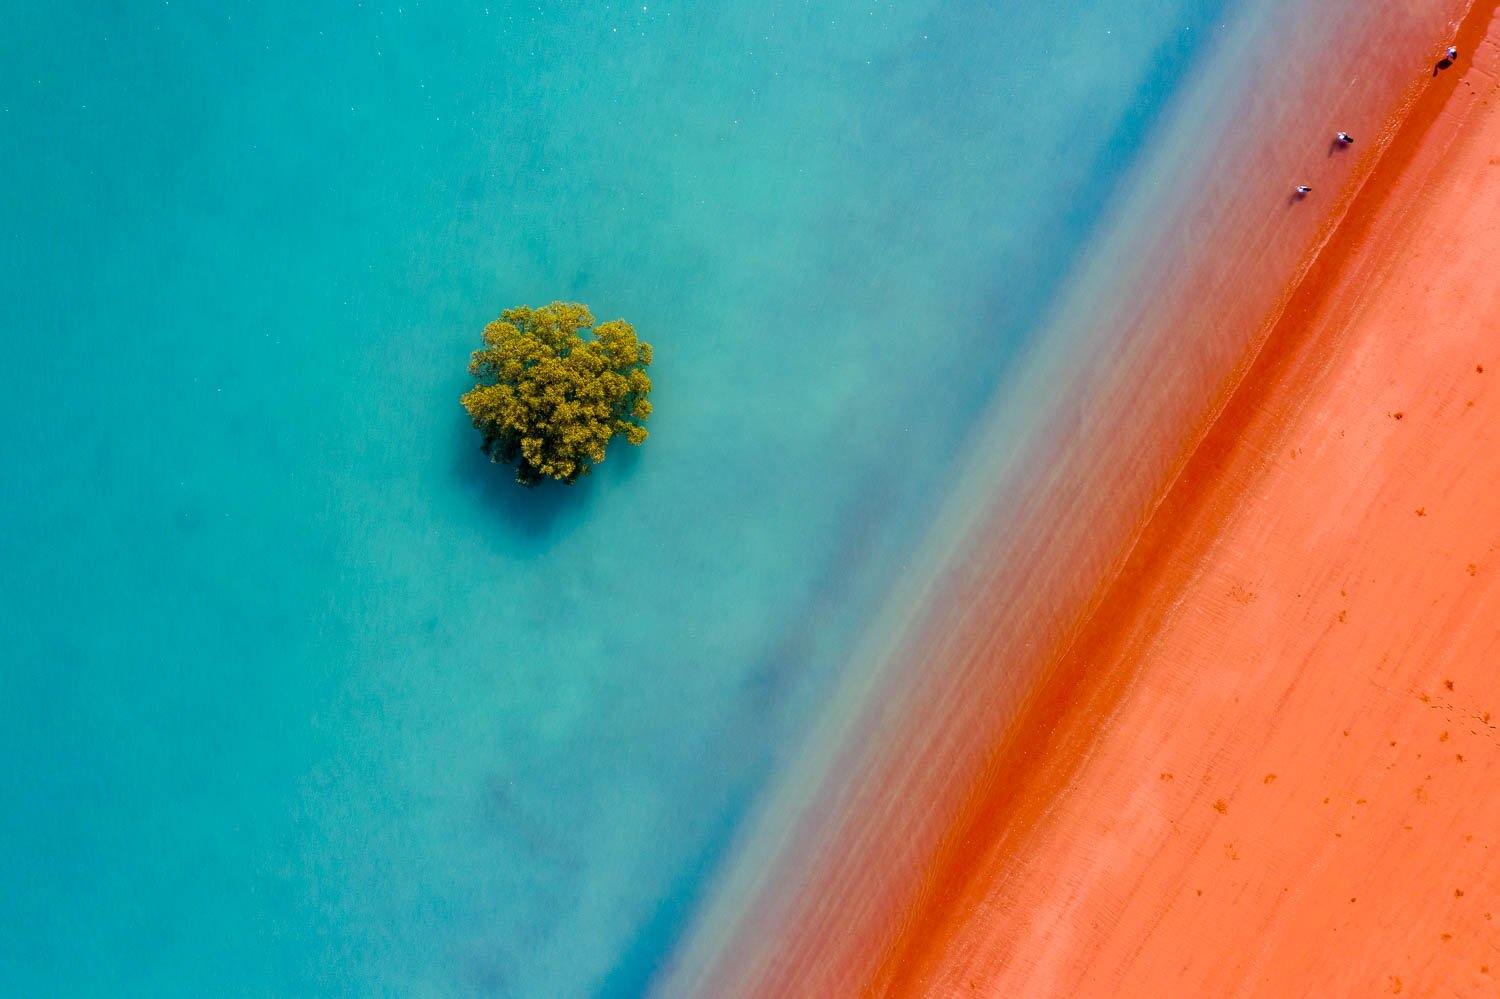 A mars-like orangish land connecting with a clear blue surface with only single dense tree on it, Broome #24 